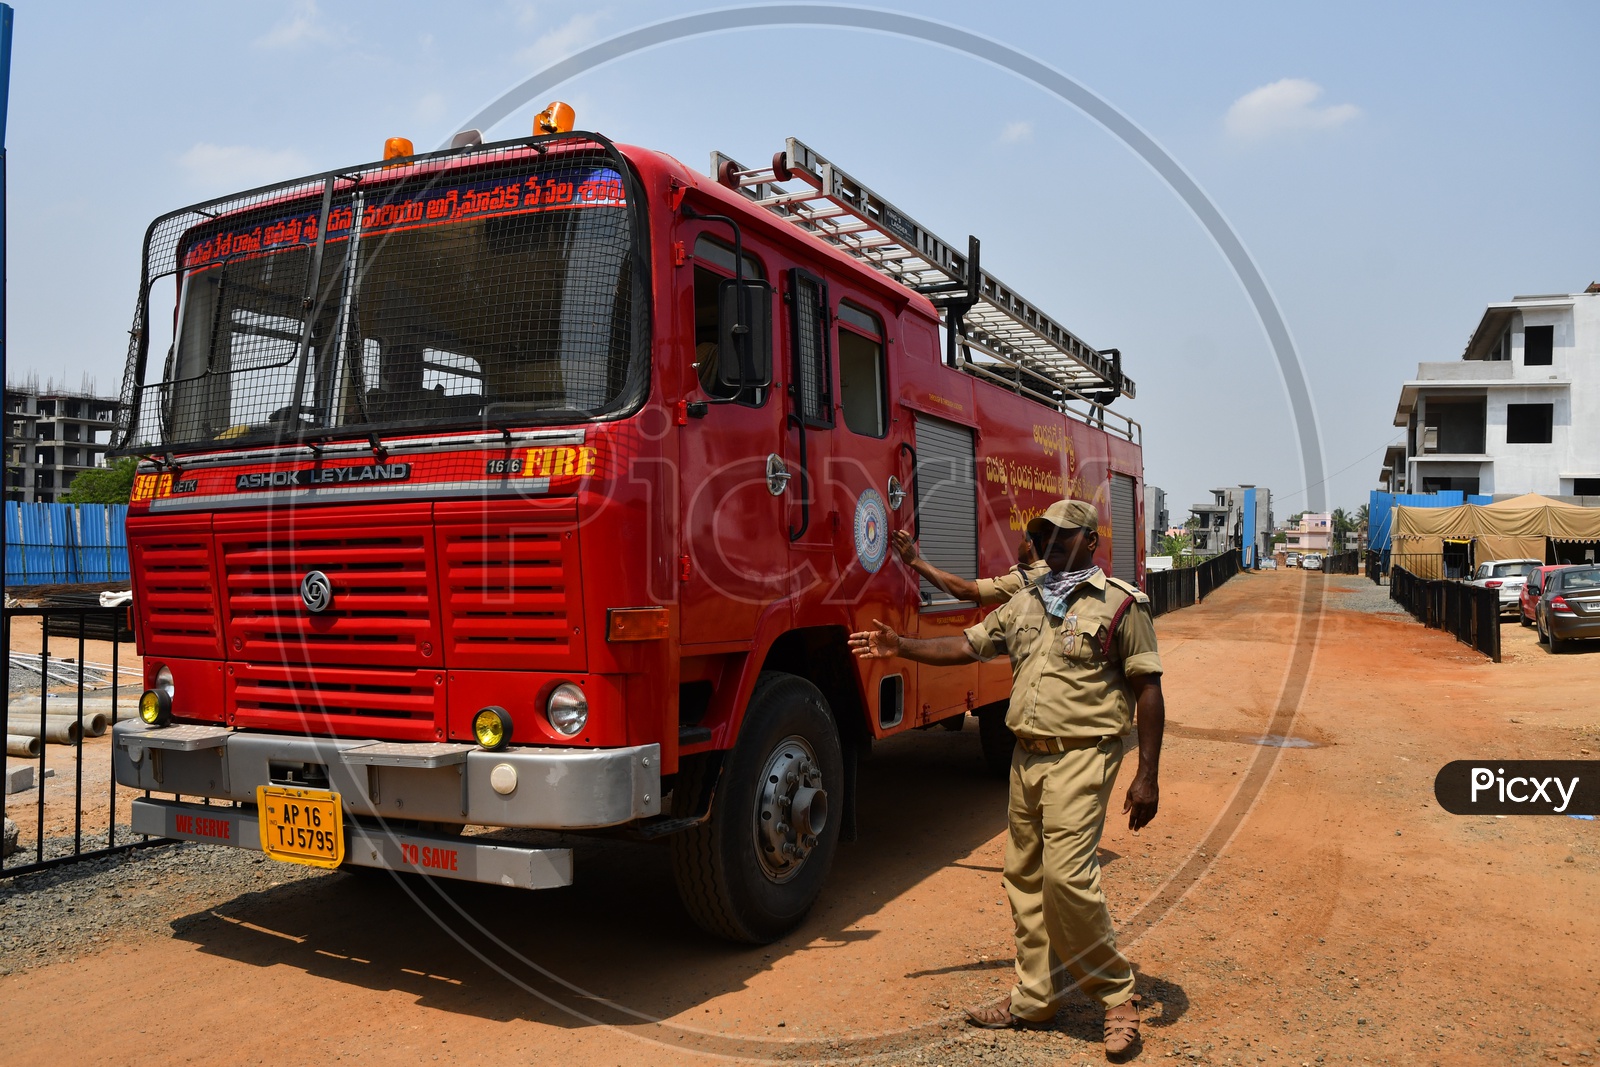 AP Disaster Management And Fire Services Fire Engine Vehicle Parked at AP CM Residence